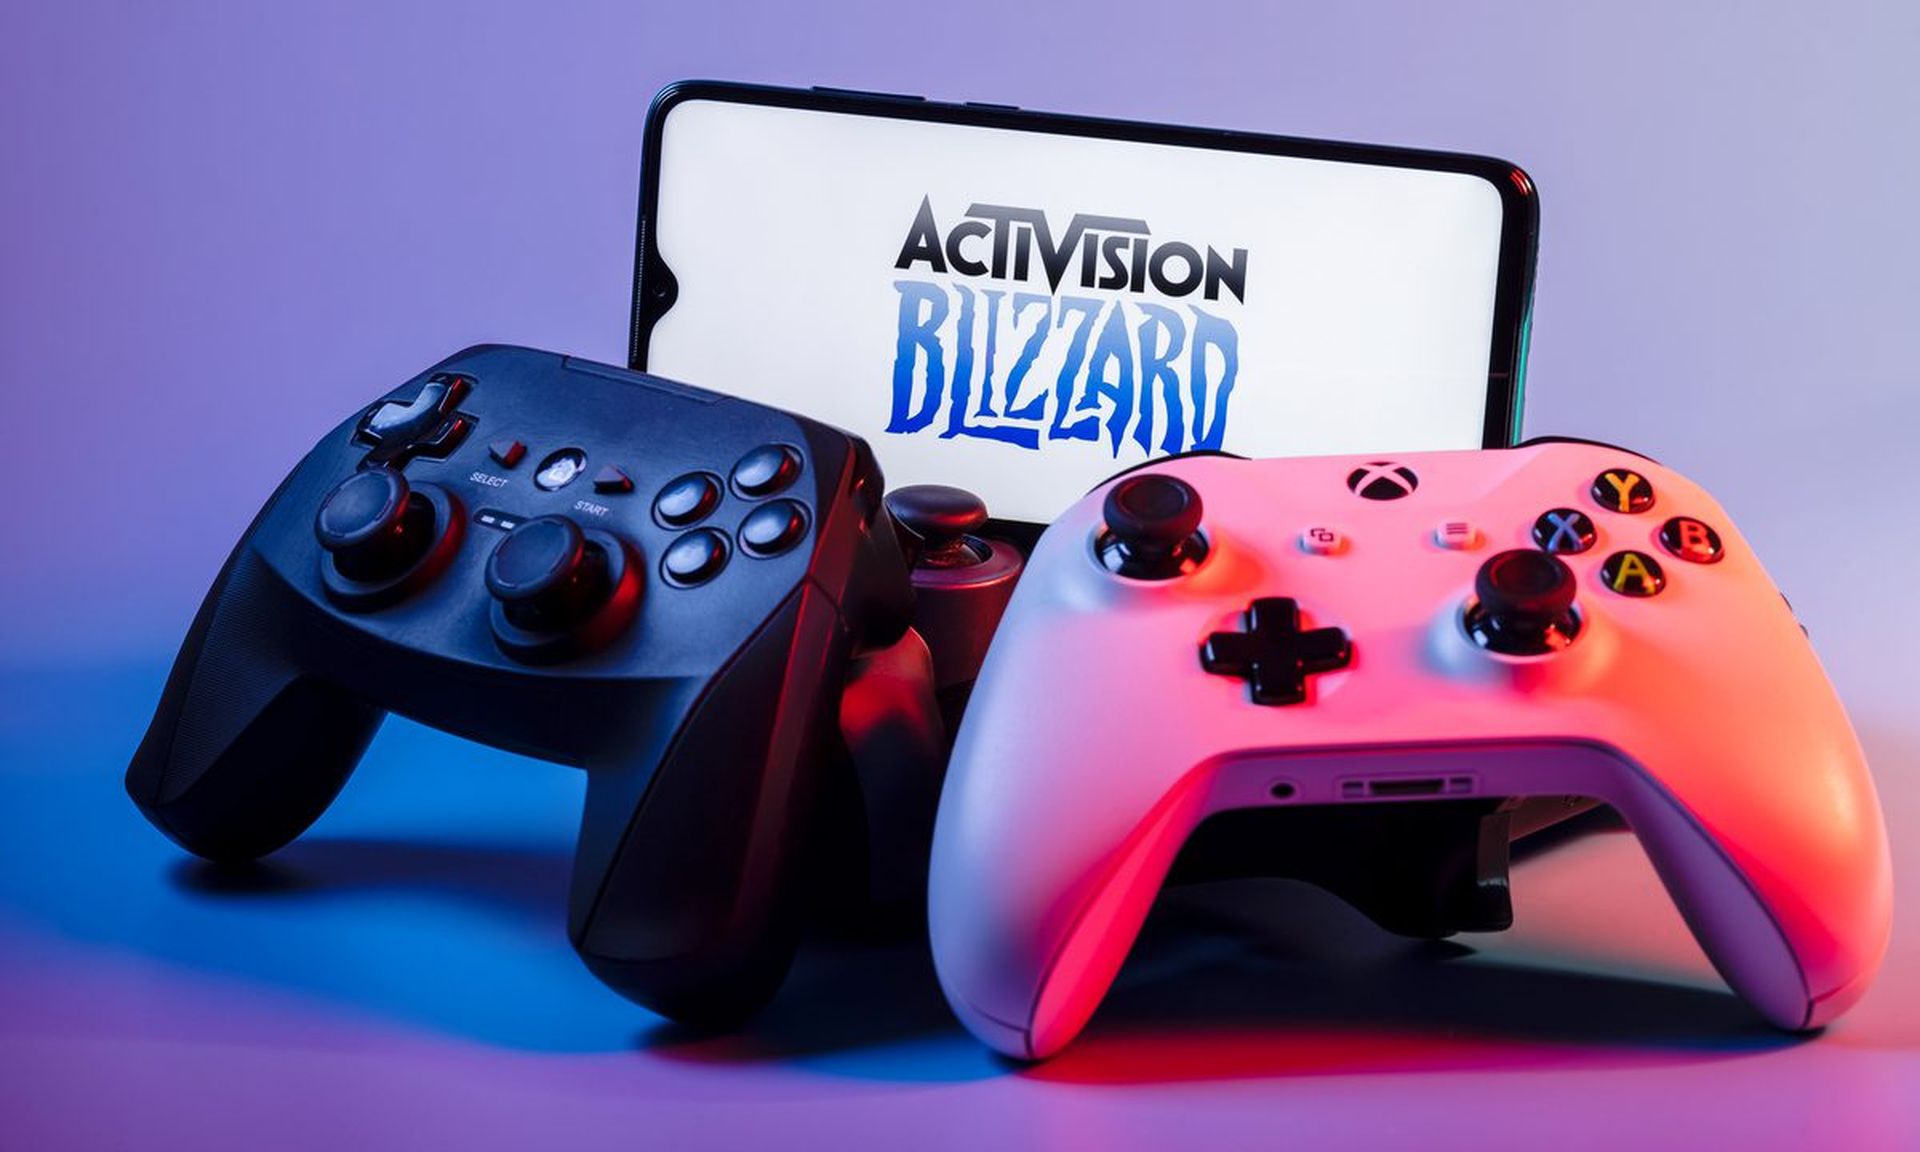 Following the closure of the Microsoft Activision deal, Microsoft's head of gaming Phil Spencer said late Tuesday that the company has "entered into a...